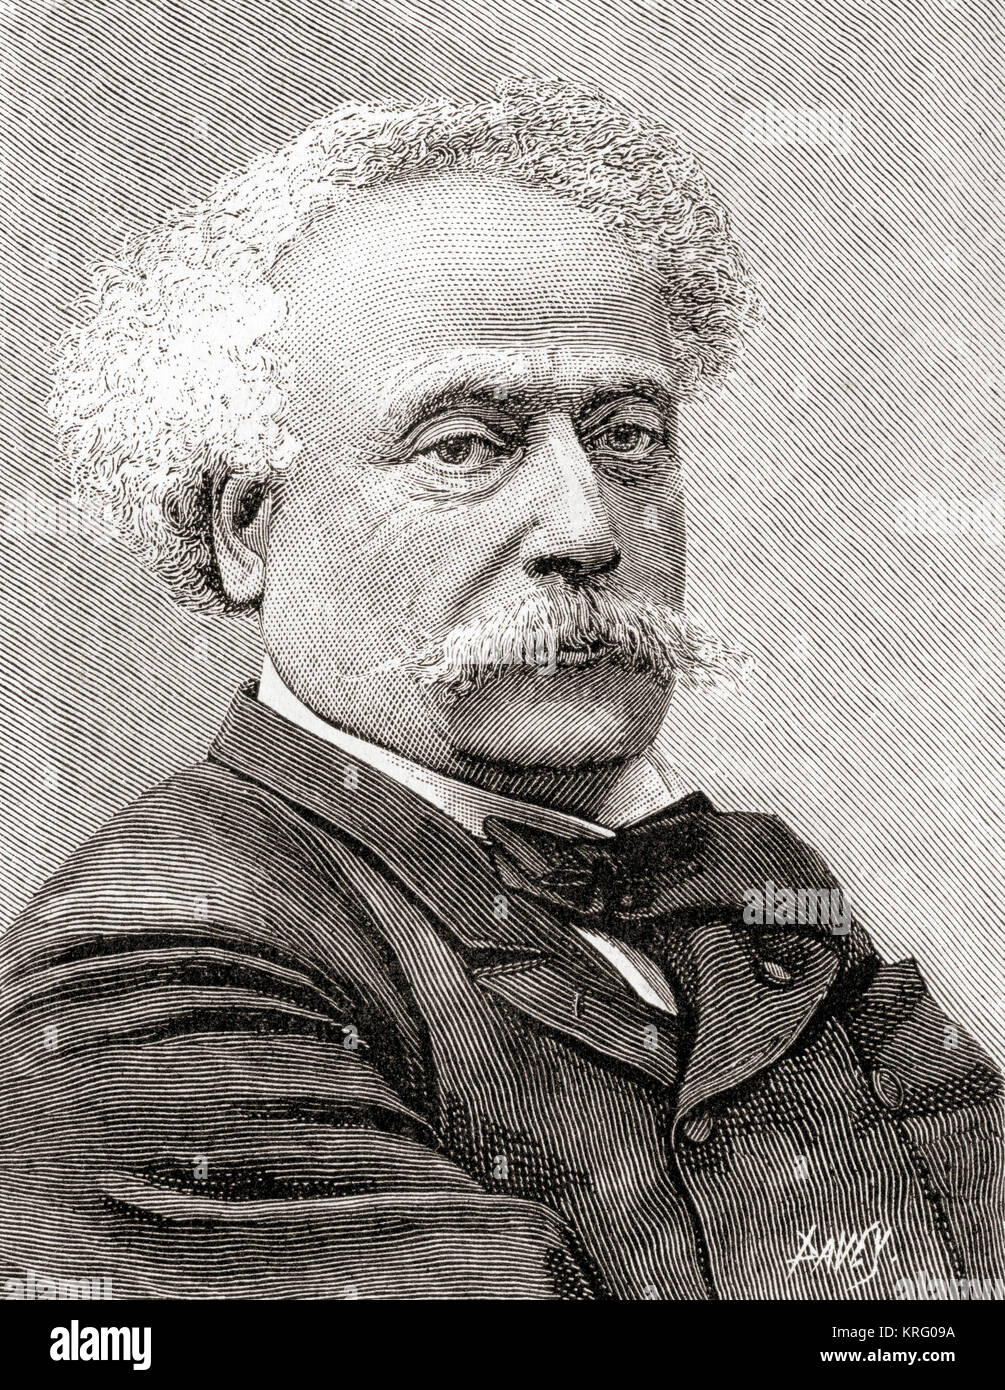 Alexandre Dumas, fils, 1824 –  1895.  French author and playwright. Seen here aged 70.  From The Strand Magazine, published January to June 1894. Stock Photo